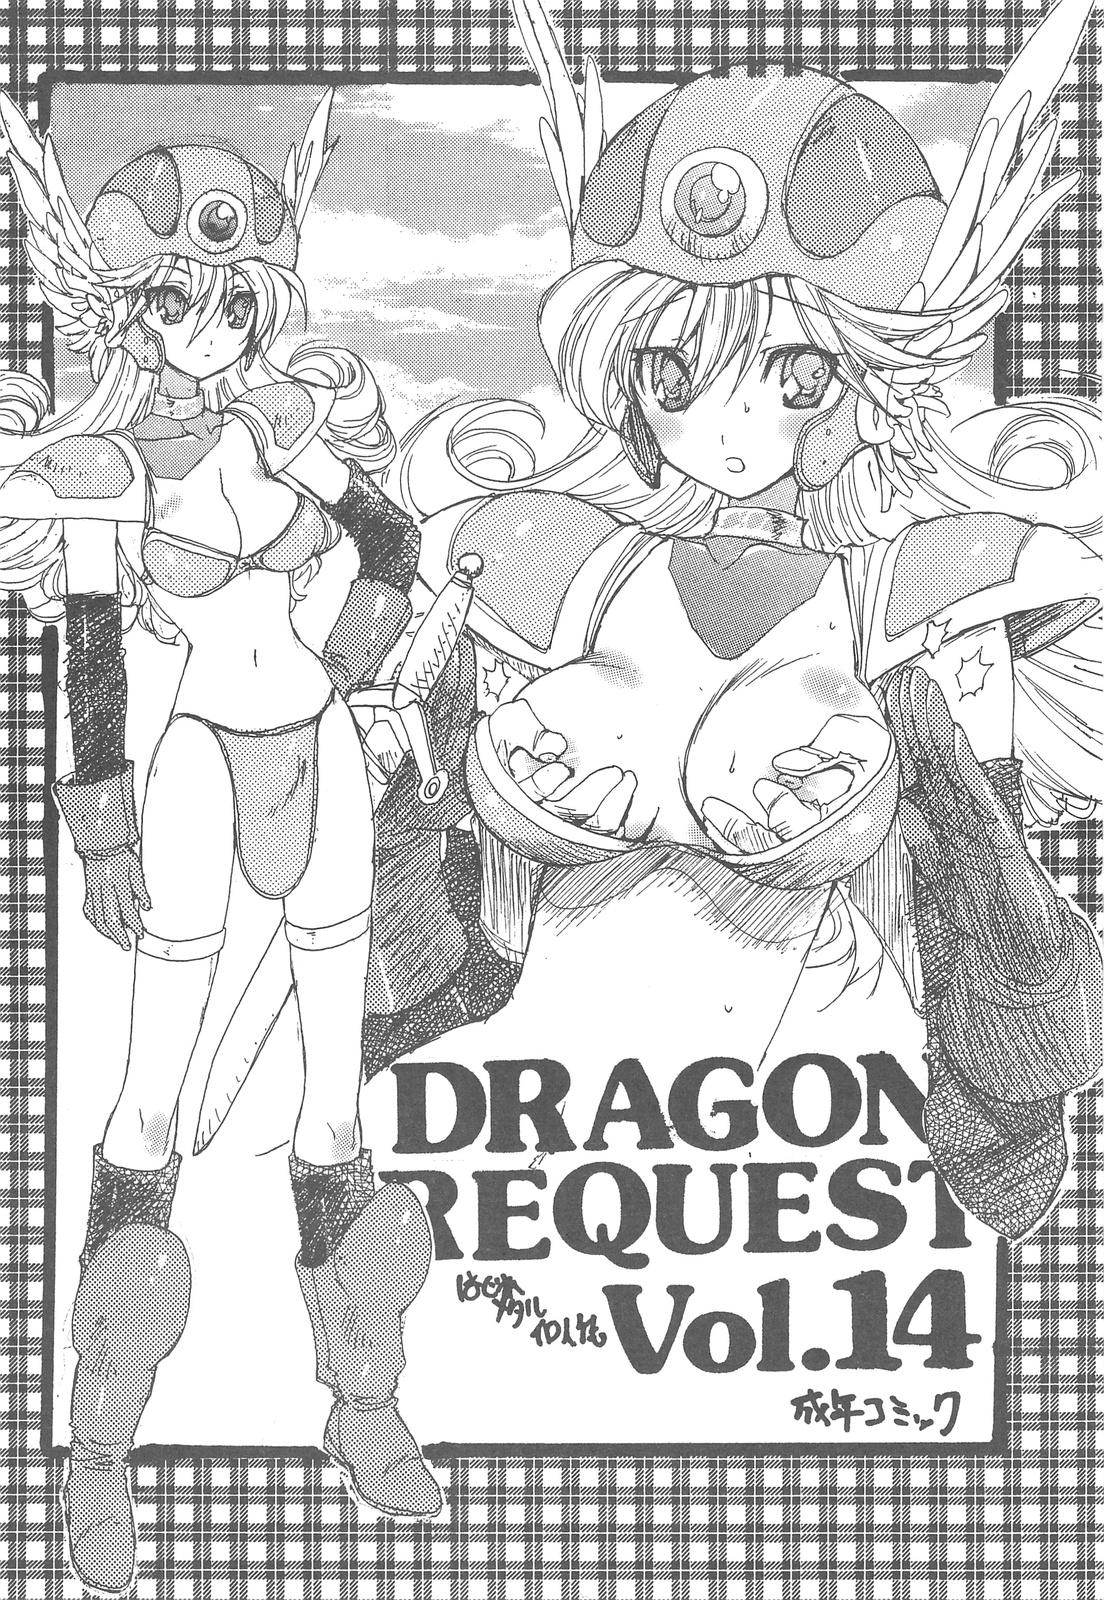 Glory Hole DRAGON REQUEST Vol.14 - Dragon quest iii Shot - Page 2